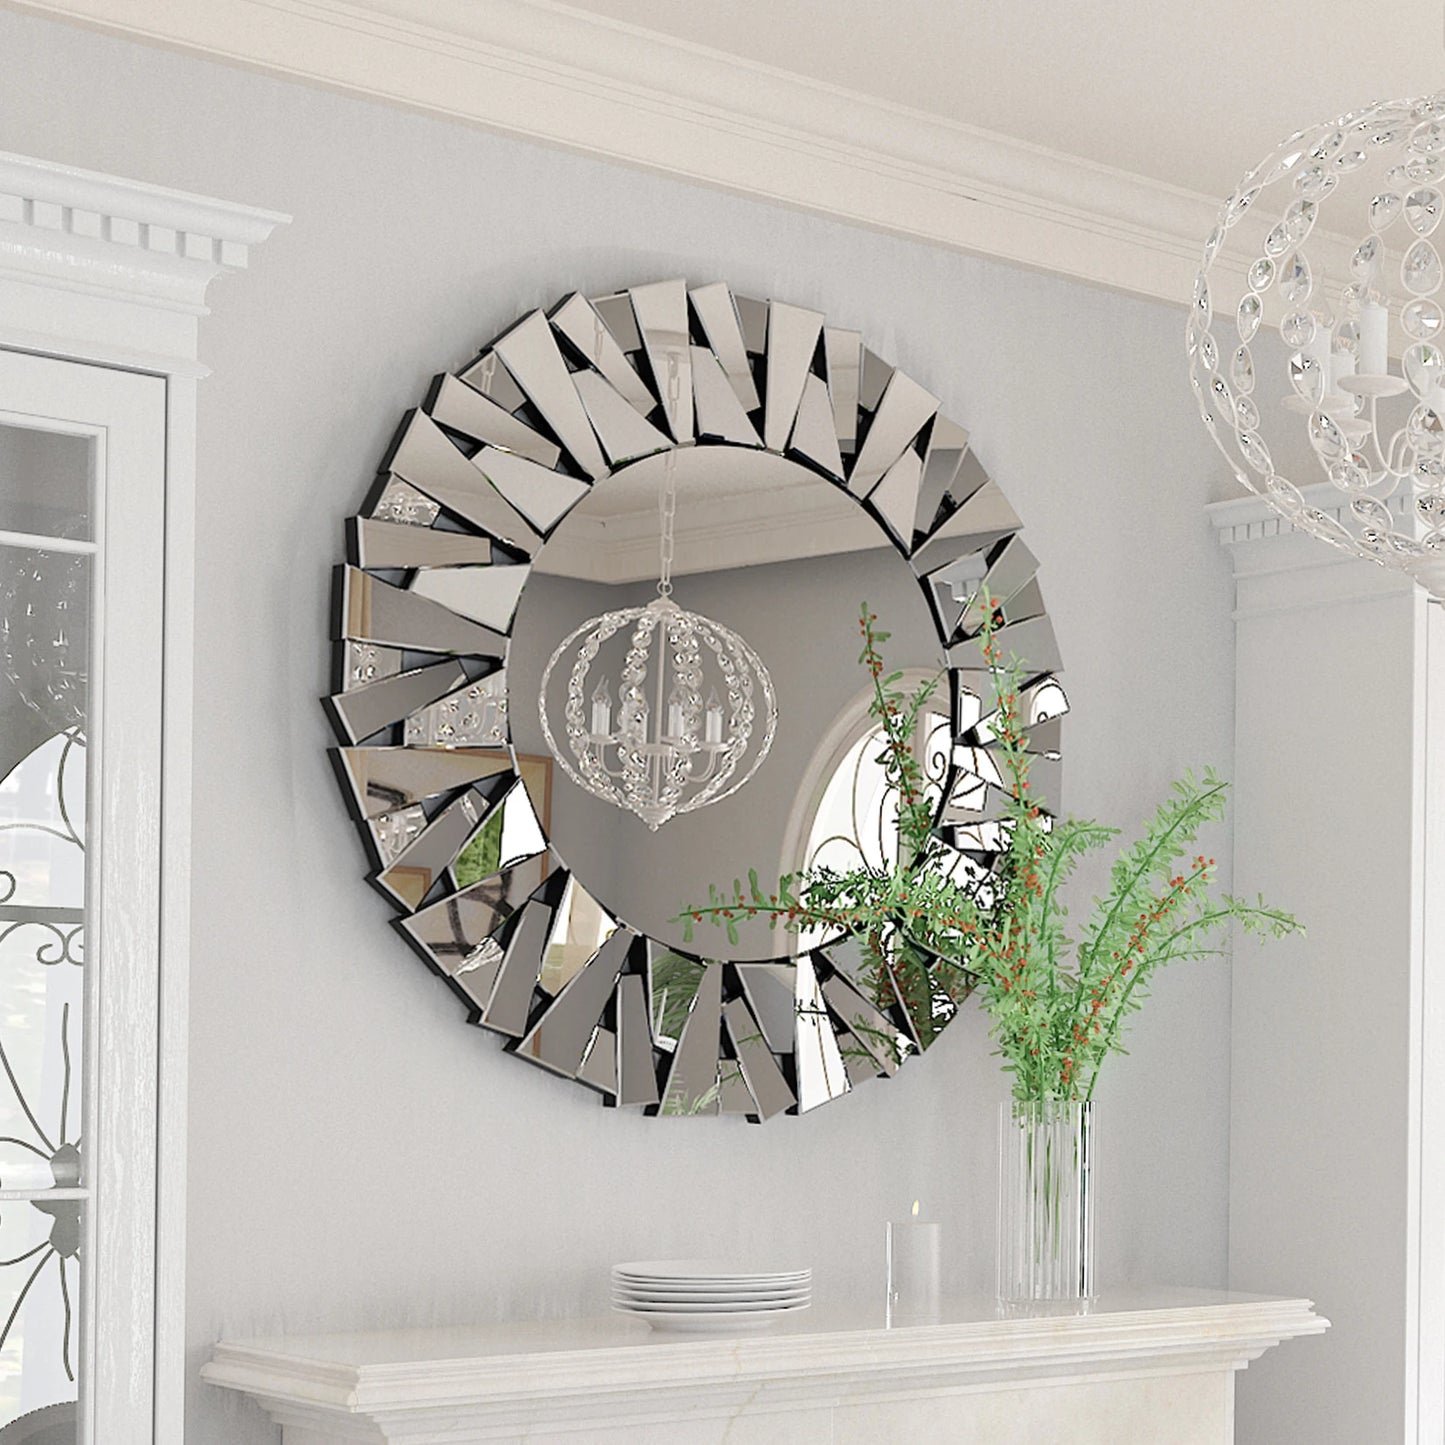 32" Wall Mirrors Decorative round Sunburst Mirror for Wall Decor Modern Silver Glass Wall-Mounted Beveled Hanging Circle Accents